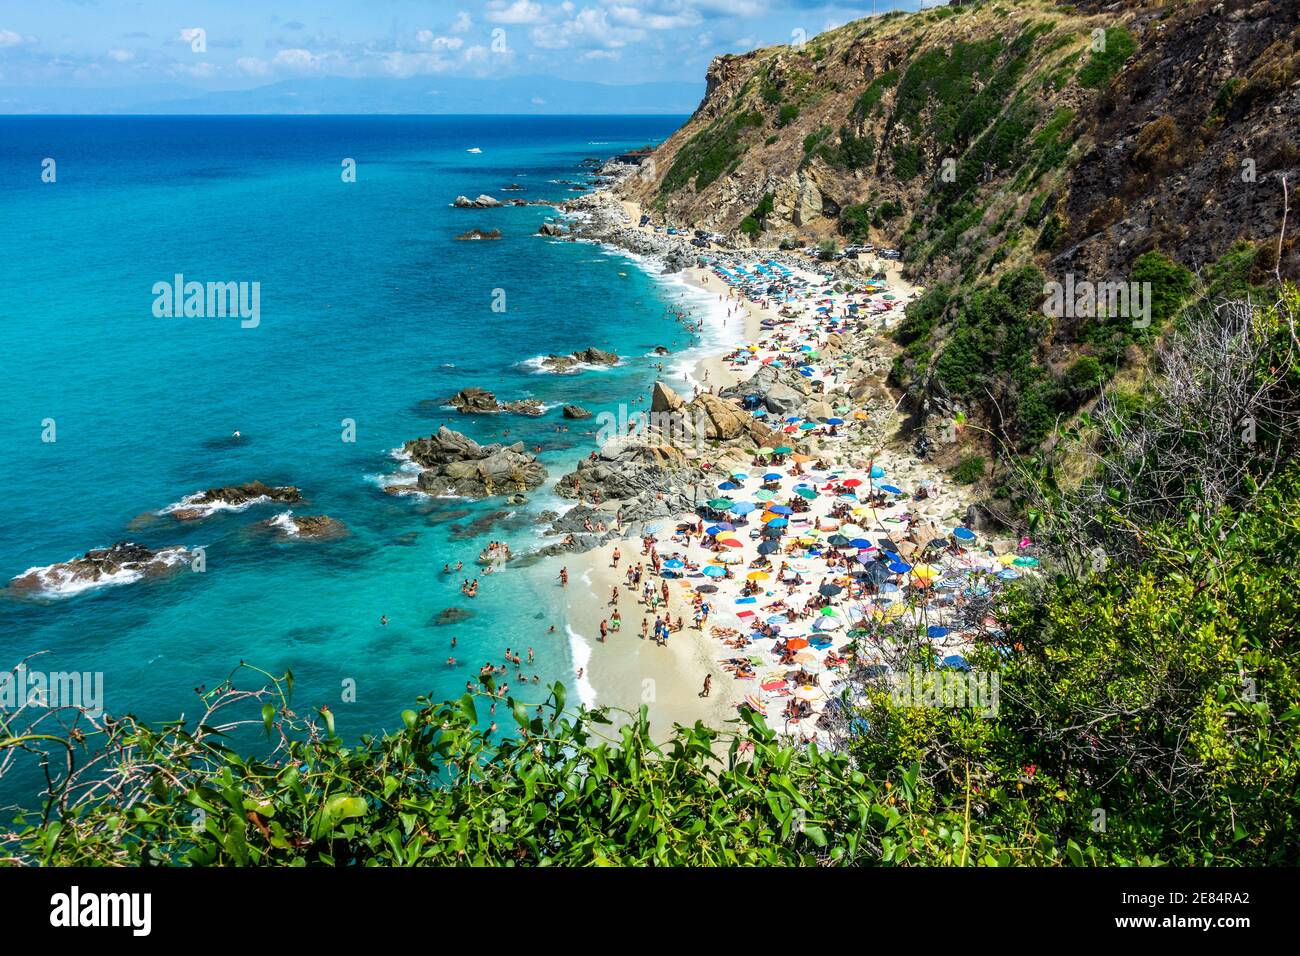 Aerial view of Zambrone “Paradiso del Sub” beach, one of the most beautiful beach of Calabria region, Italy Stock Photo